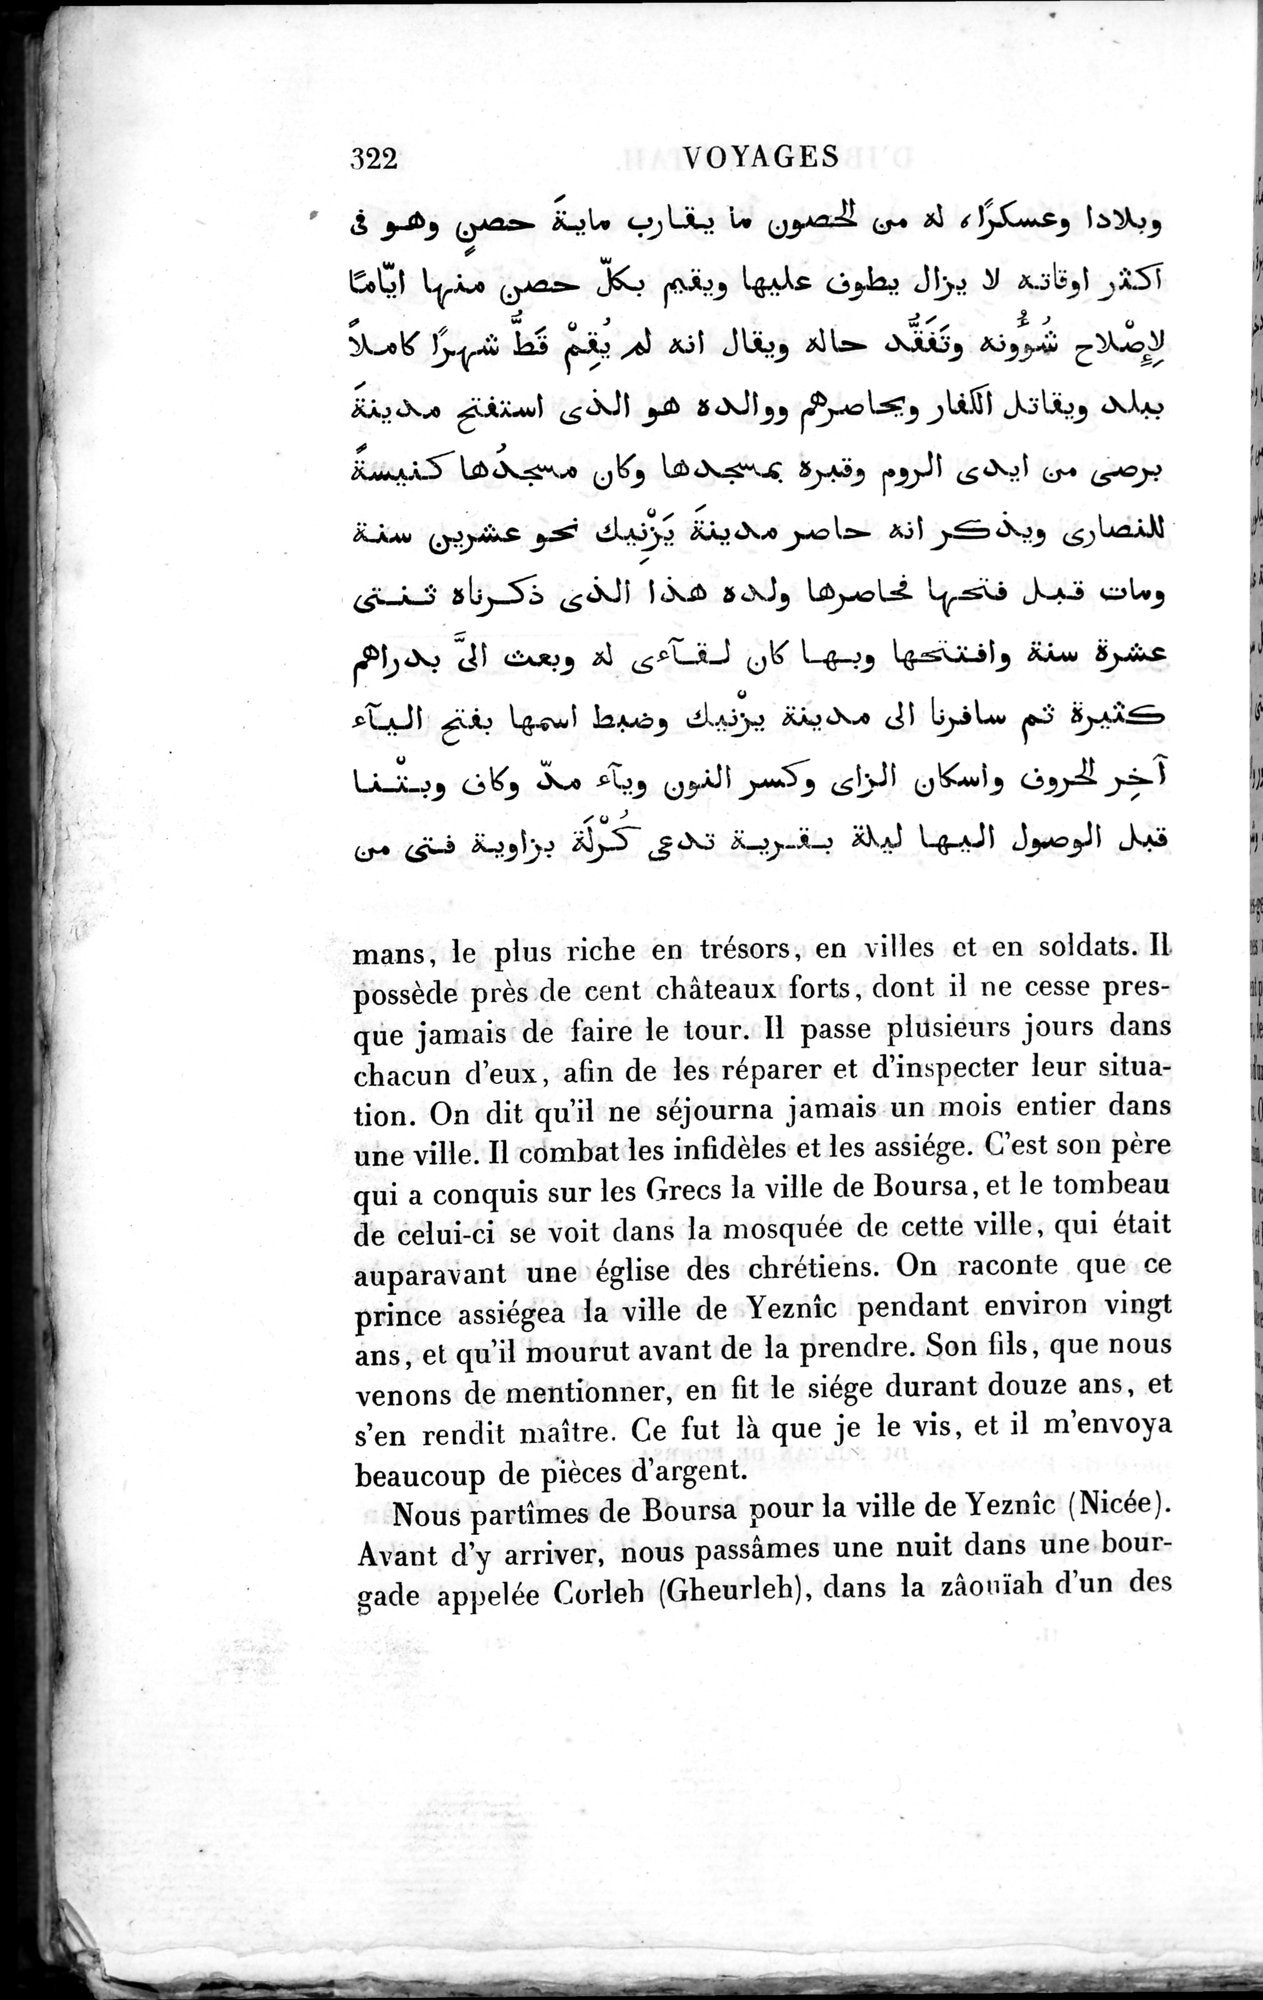 Voyages d'Ibn Batoutah : vol.2 / Page 350 (Grayscale High Resolution Image)